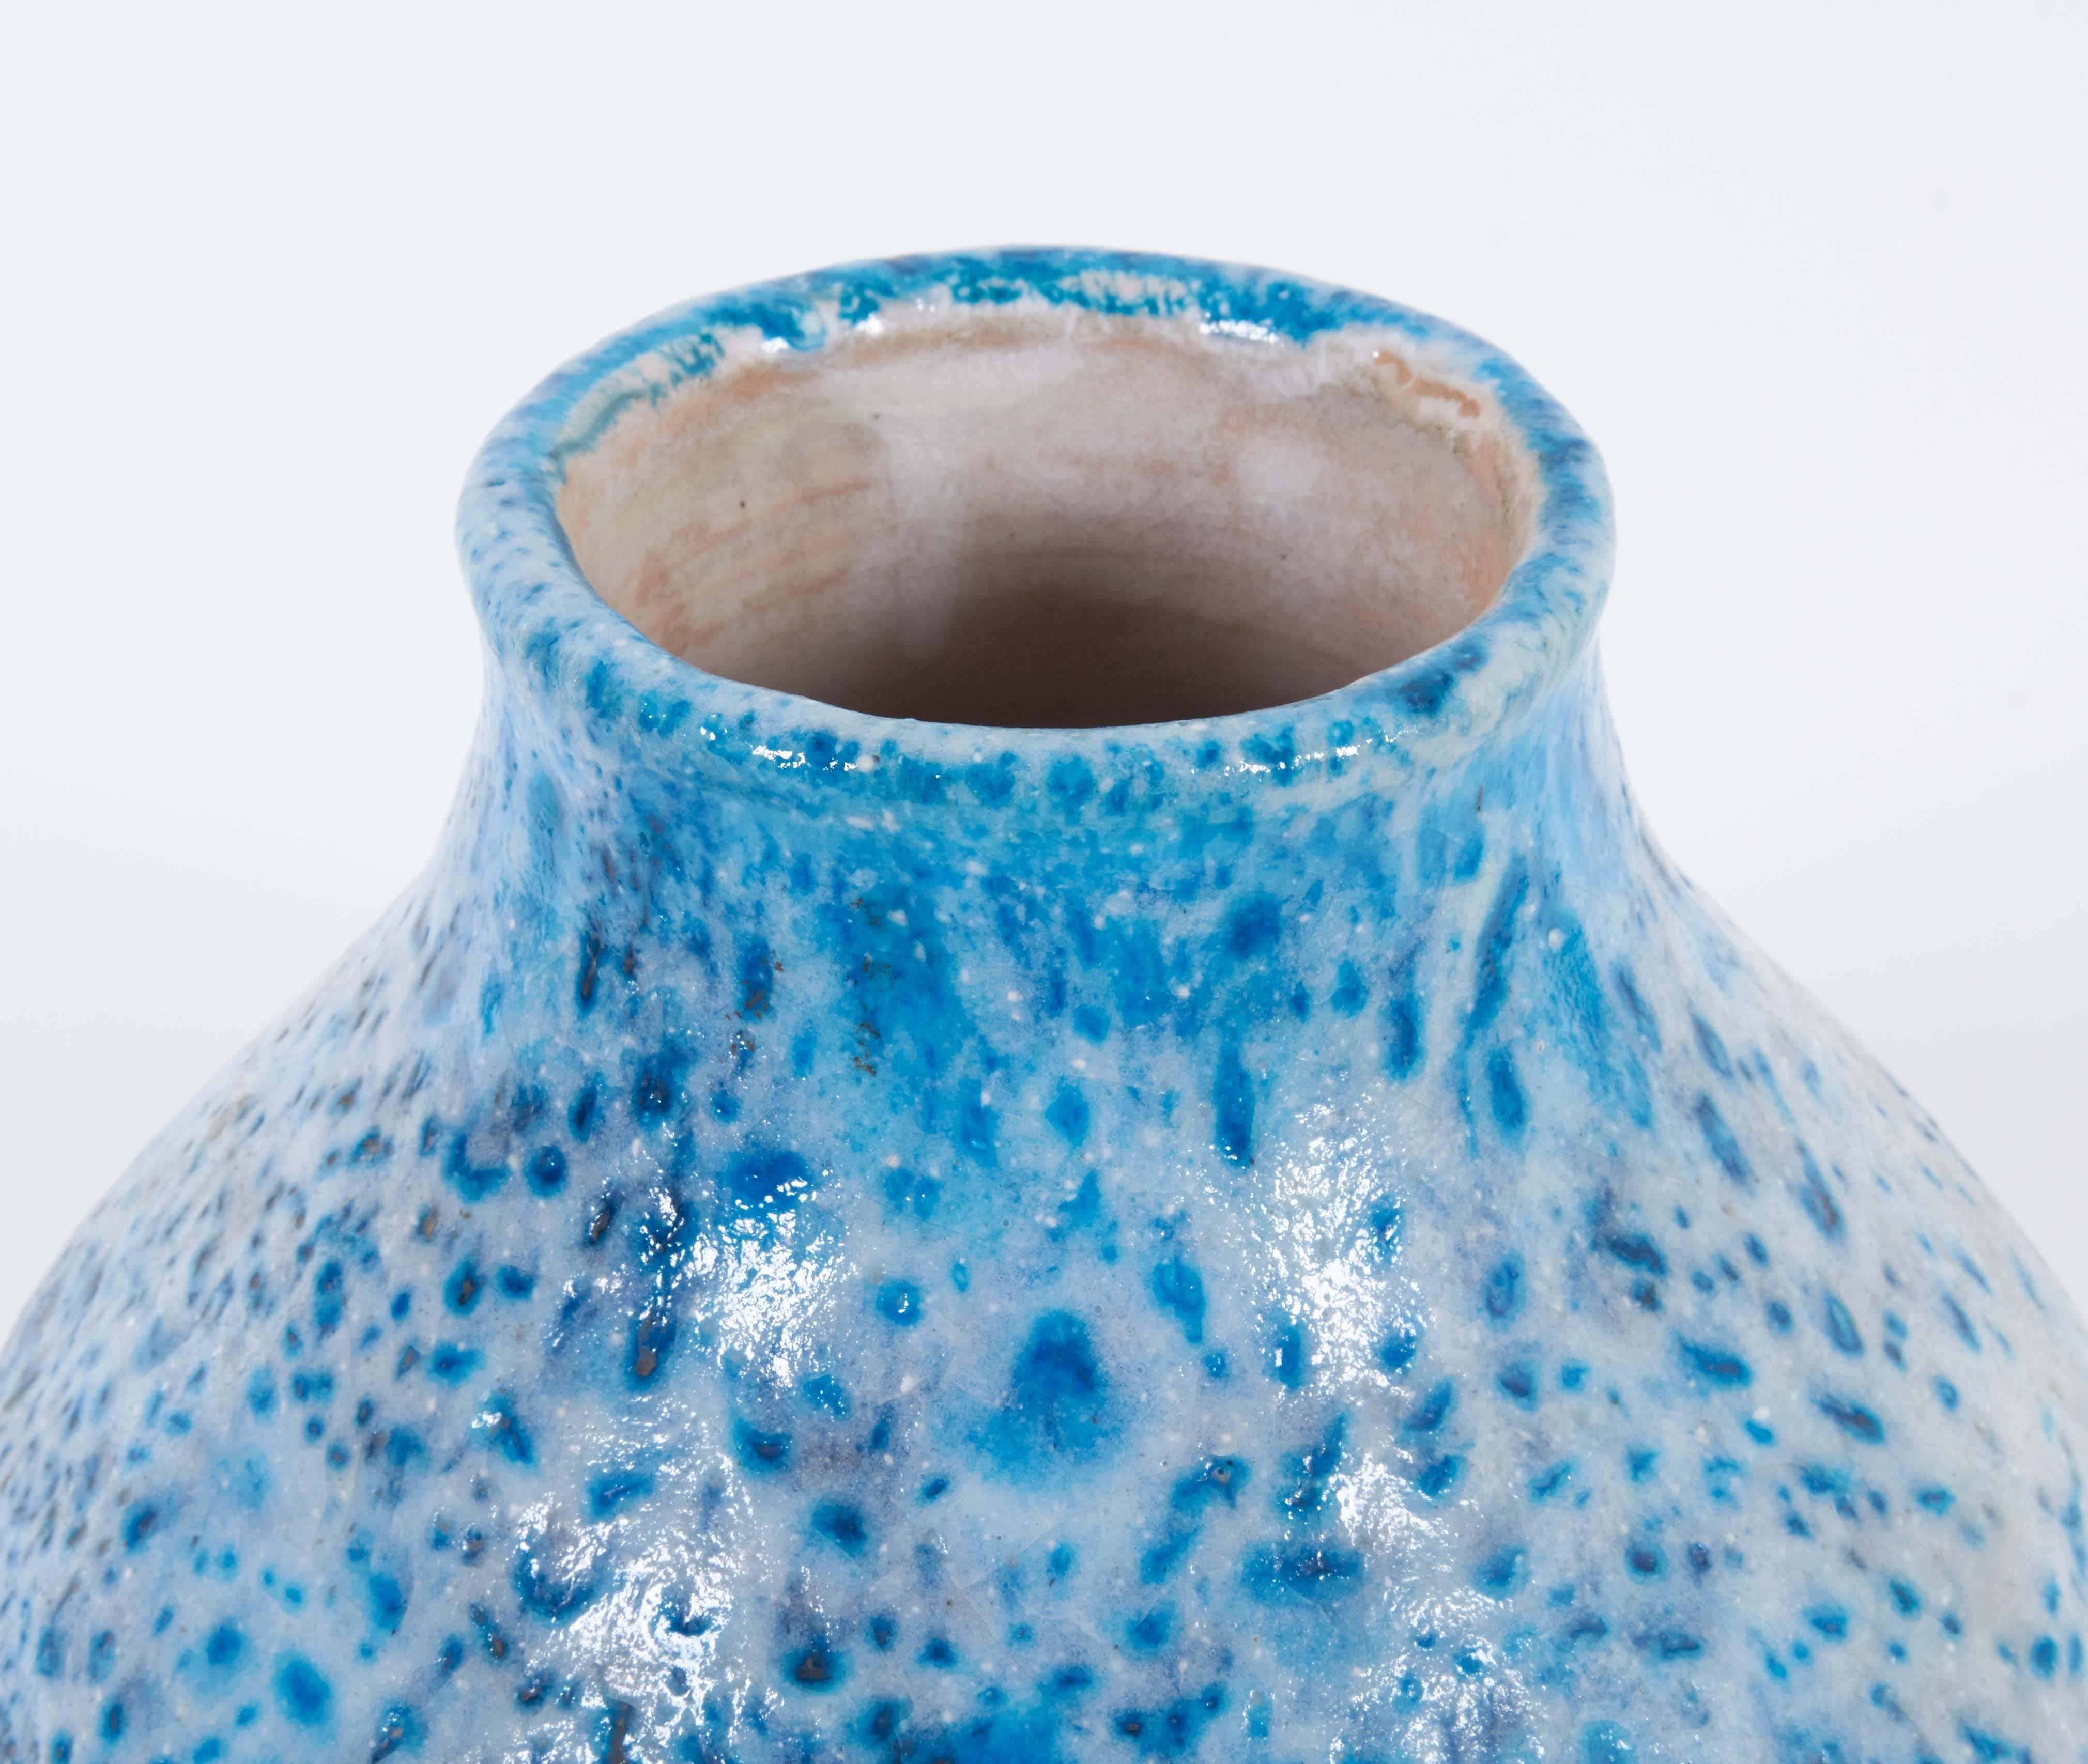 An Italian pottery vase by Guido Gambone, produced circa 1950s -1960s, truncated with round body, decorated in mottled blue and white glazes. Markings include [Gambone Italy] signed to base. Excellent vintage condition, consistent with age.

10454